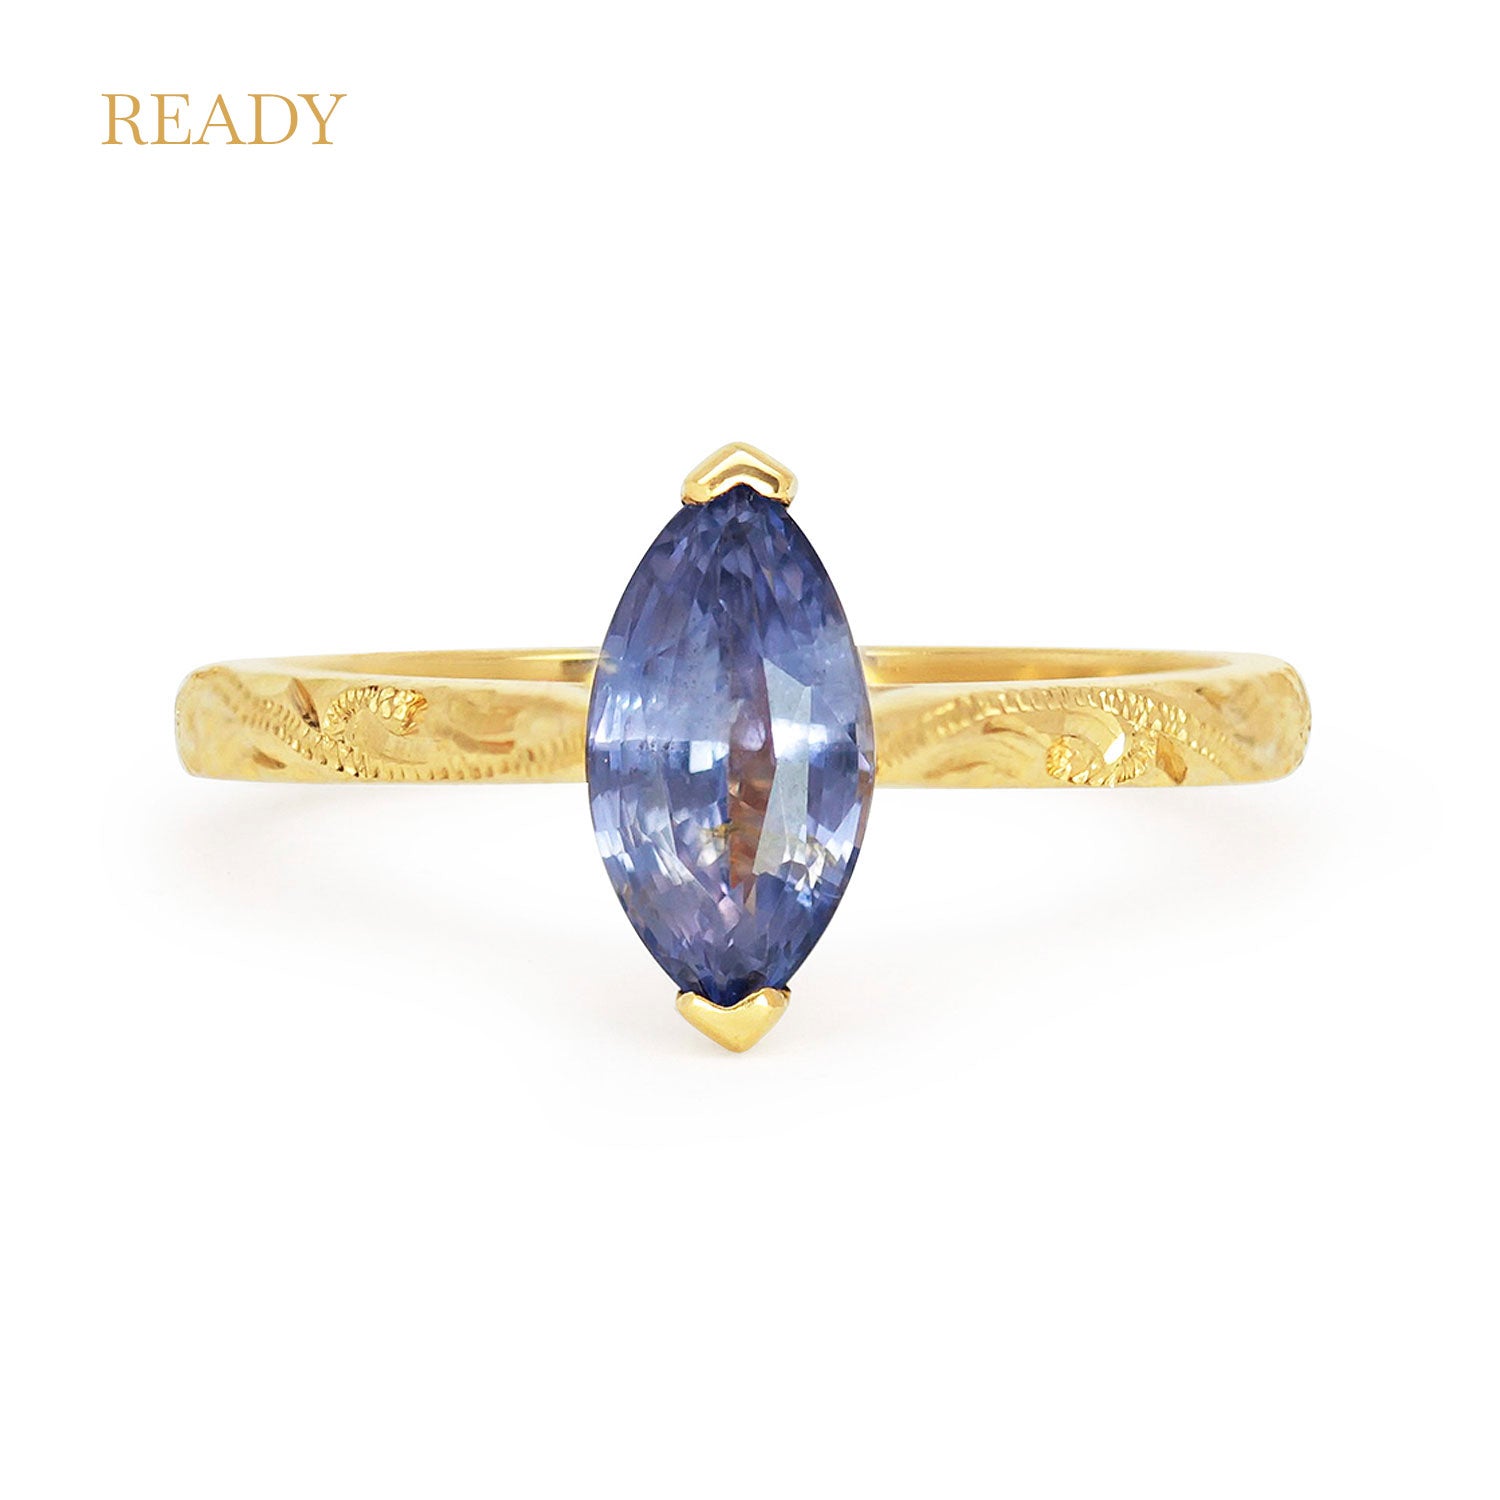 Fancy Athena ethical solitaire engagement ring in 18ct yellow Fairtrade Gold, hand-engraved and set with a blue marquise sapphire of fair-traded and traceable Sri Lankan provenance